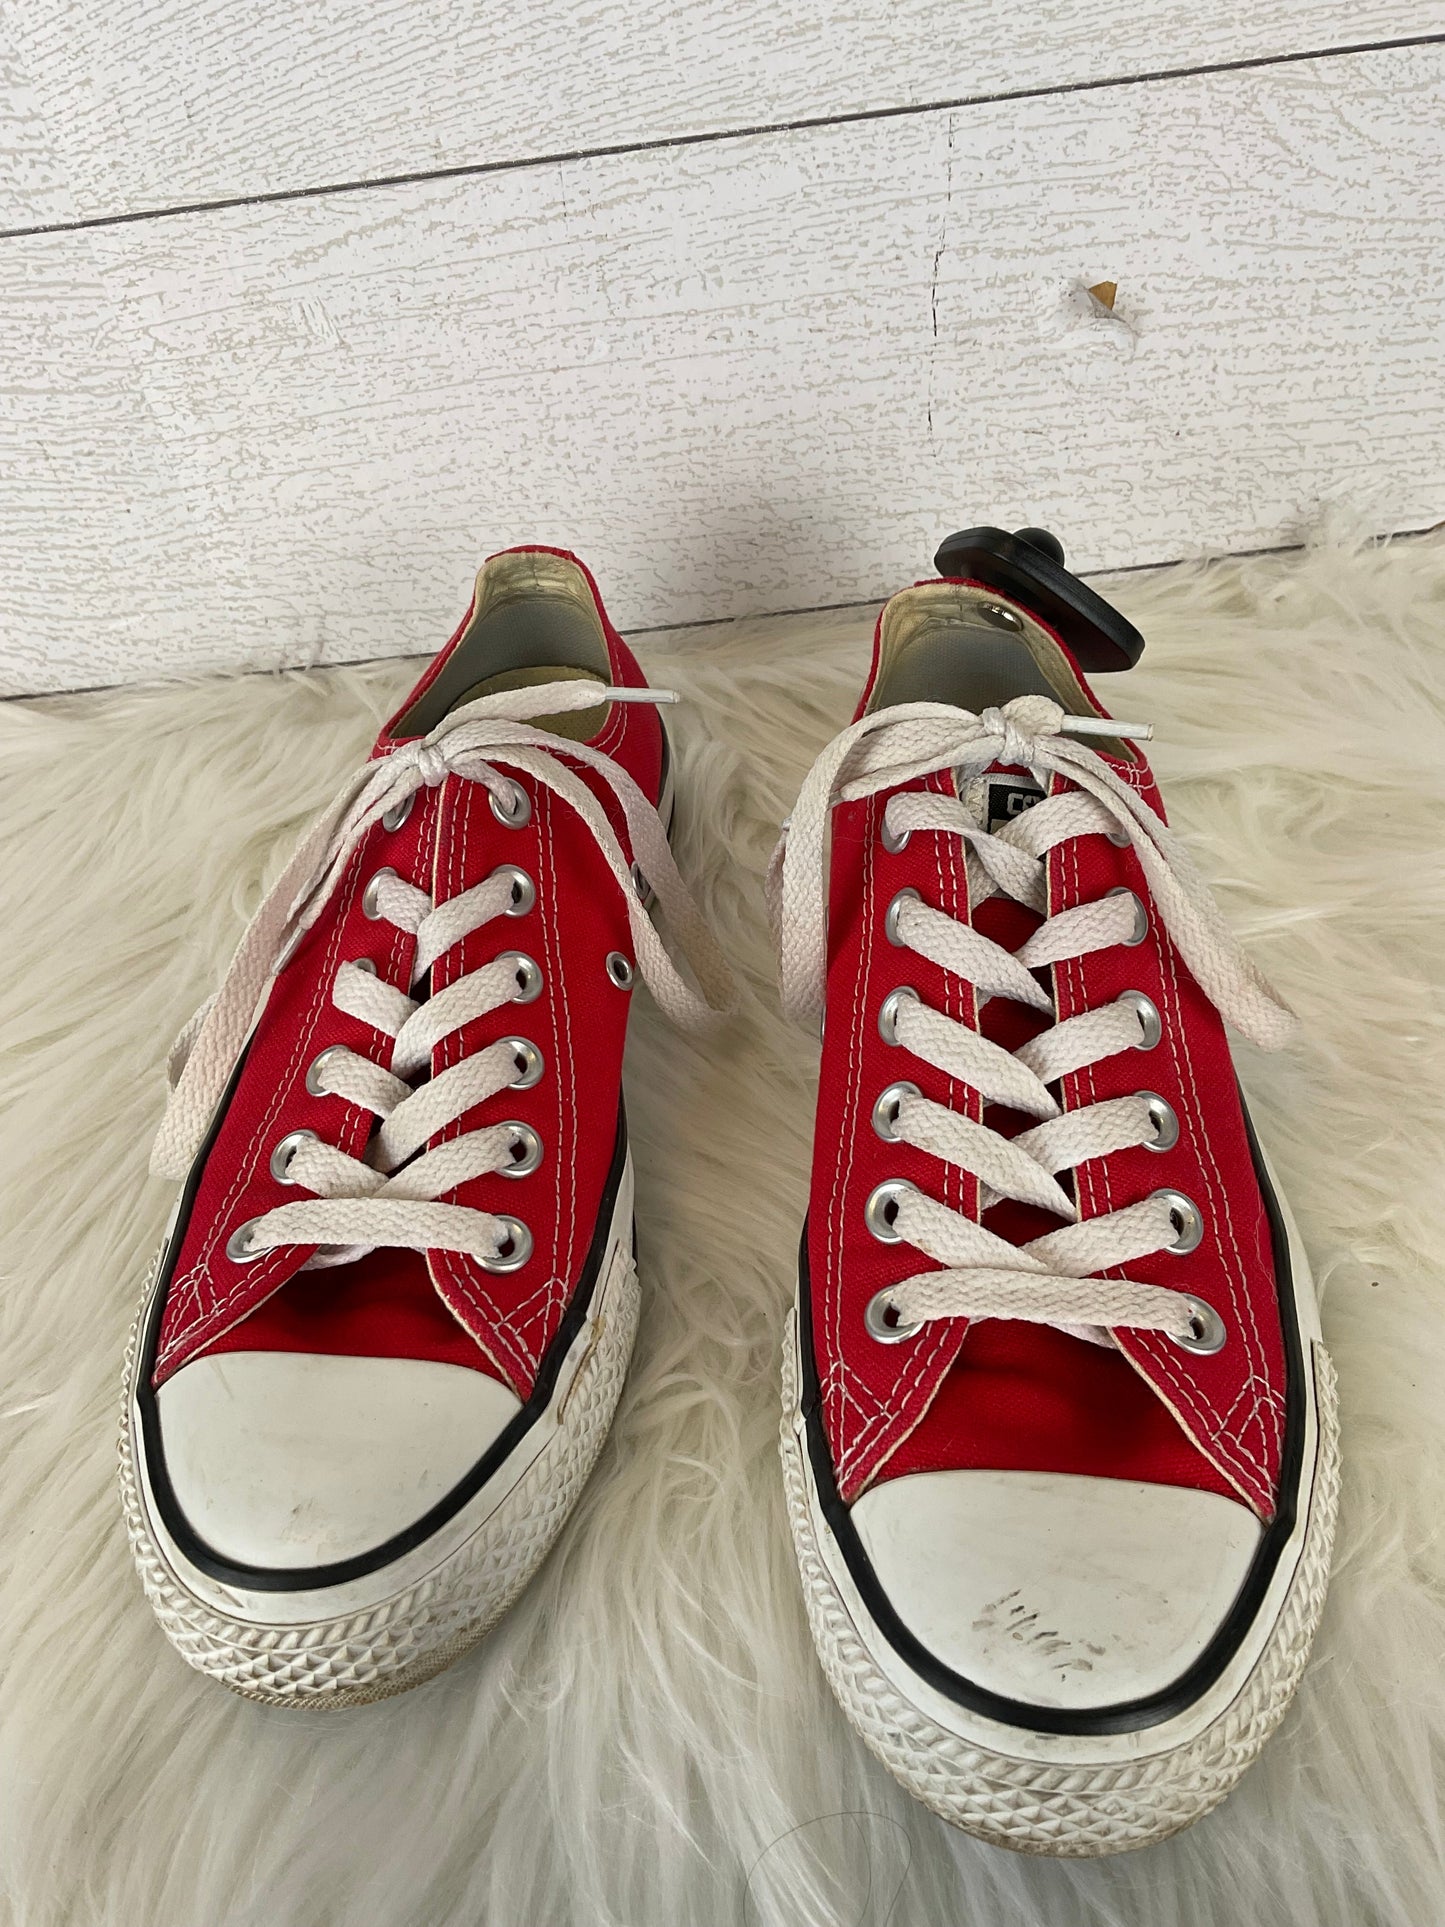 Red Shoes Sneakers Converse, Size 7